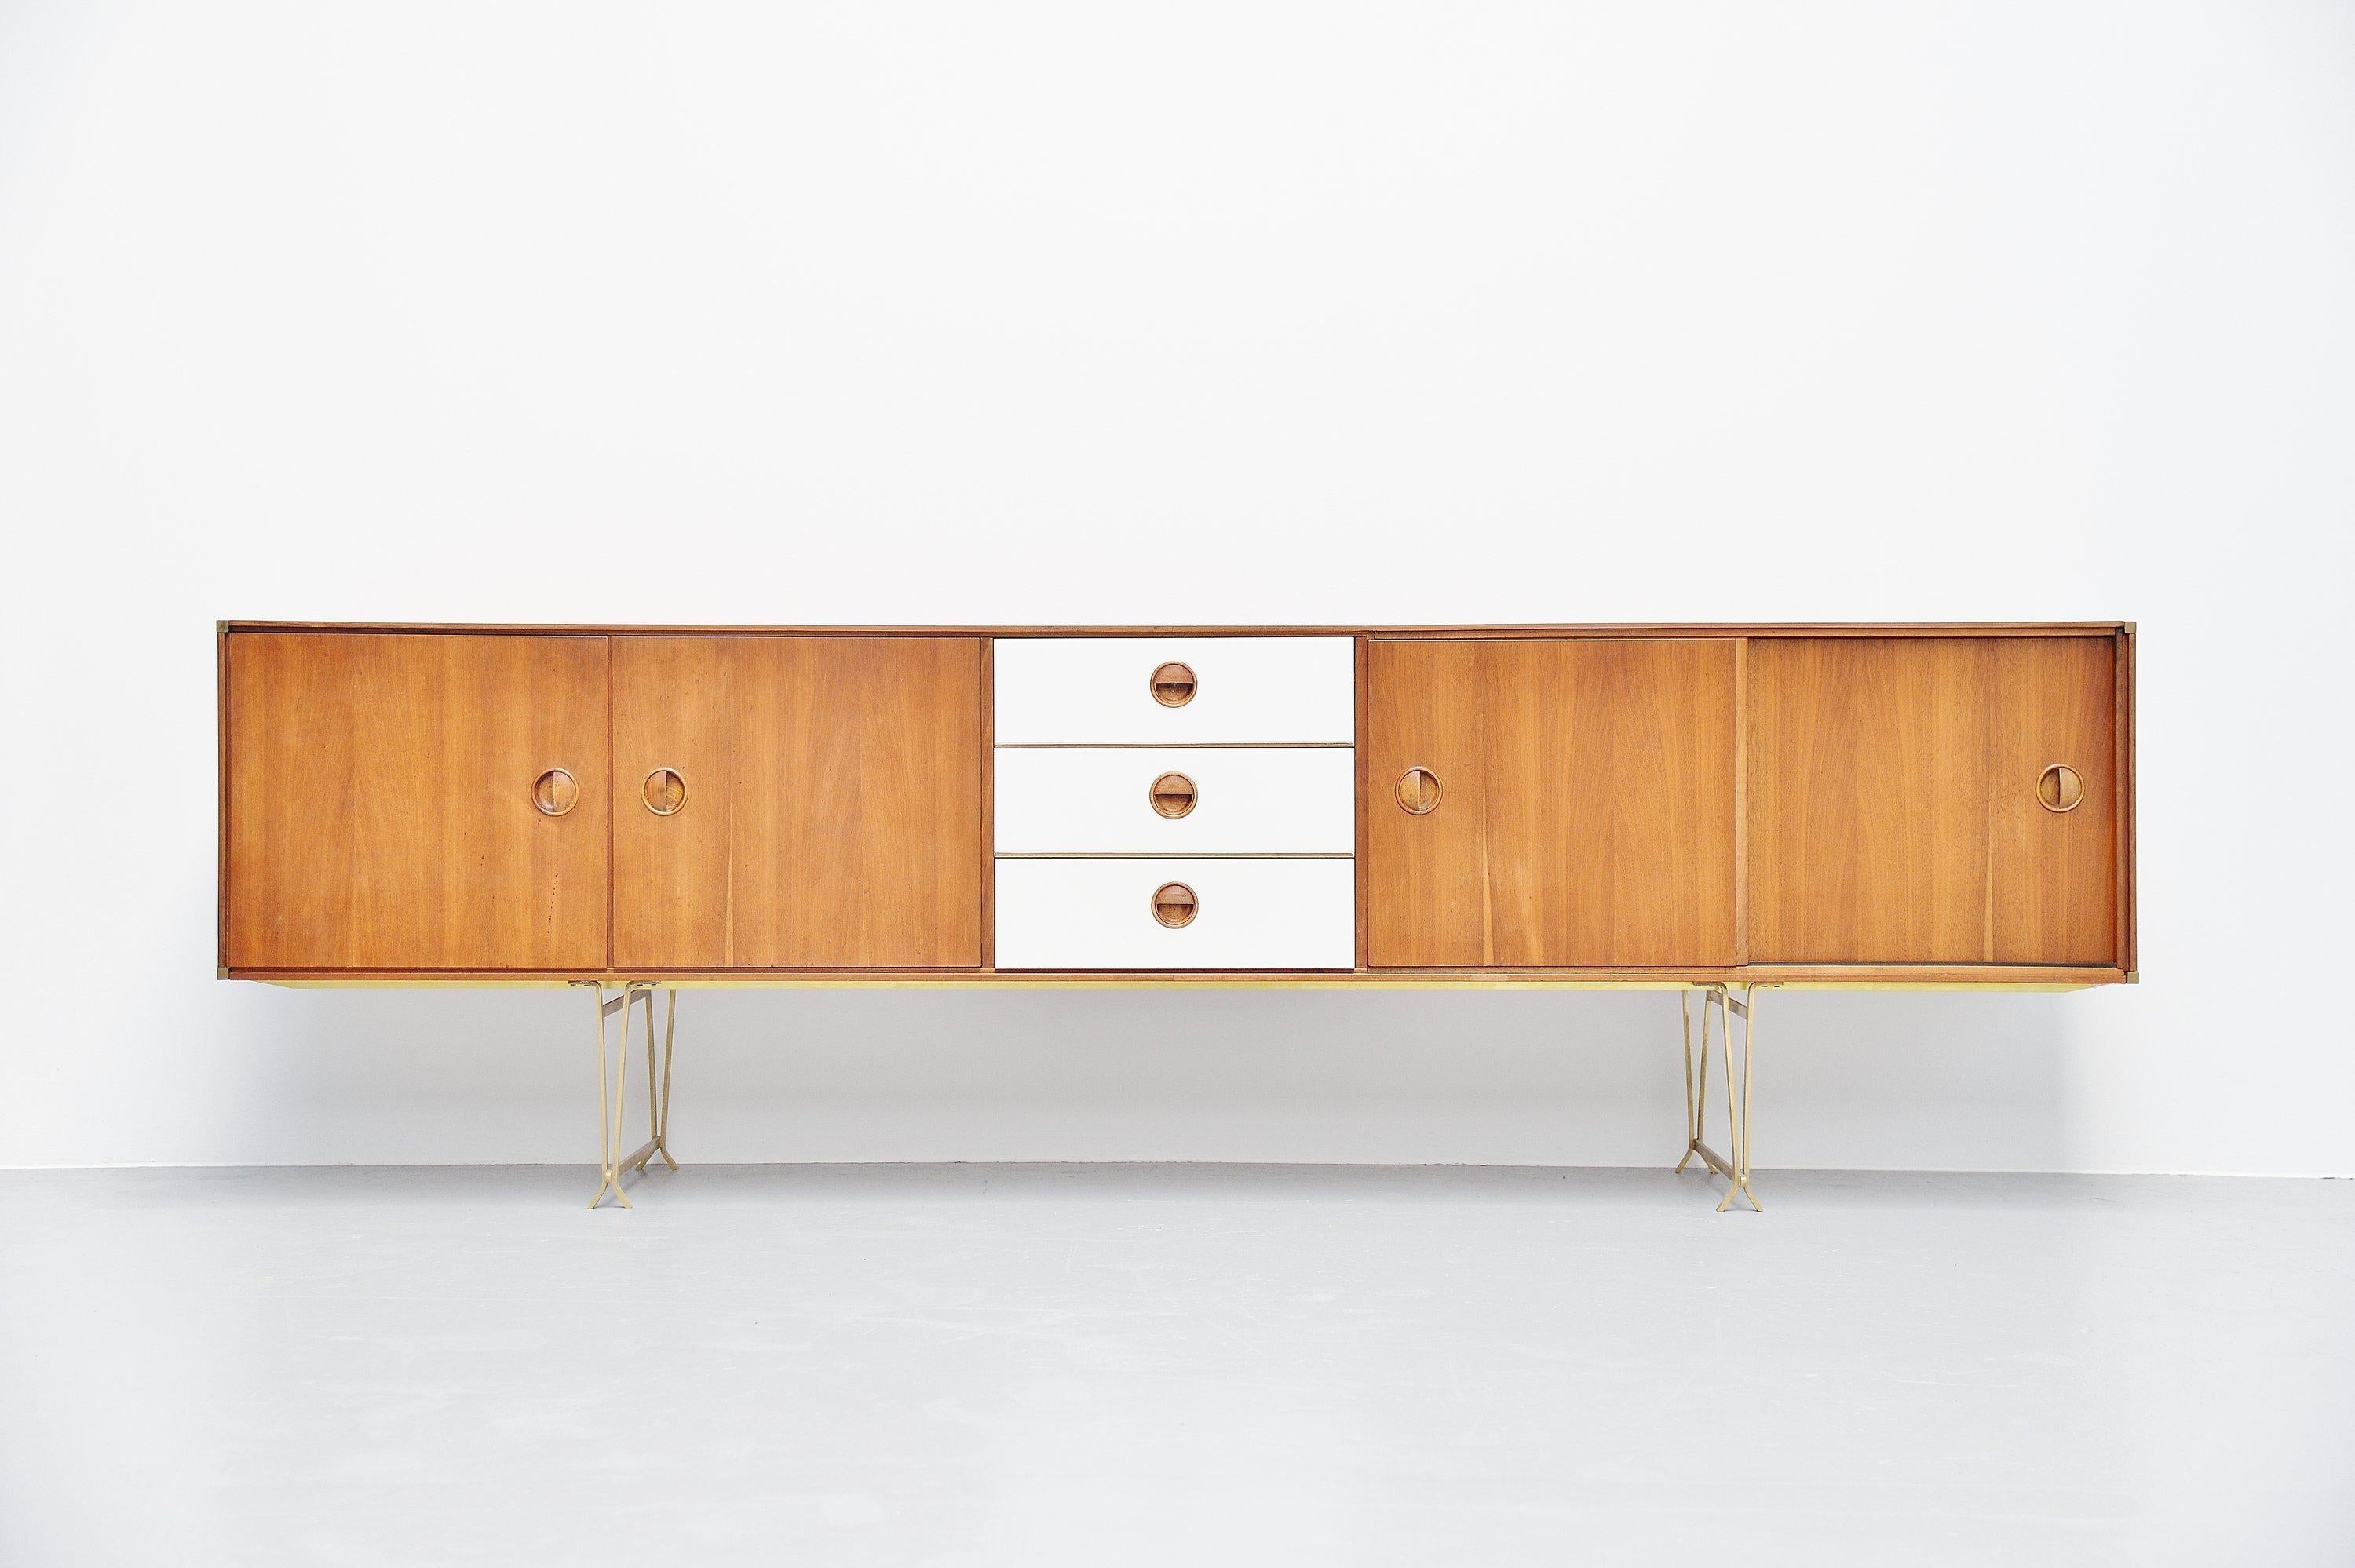 Superb long Minimalist sideboard designed by William Watting and manufactured by Fristho, Holland 1954. The credenza is made of teak wood and has brass details, corners, legs etc. The 3 drawers in the middle are white painted. On the left there are